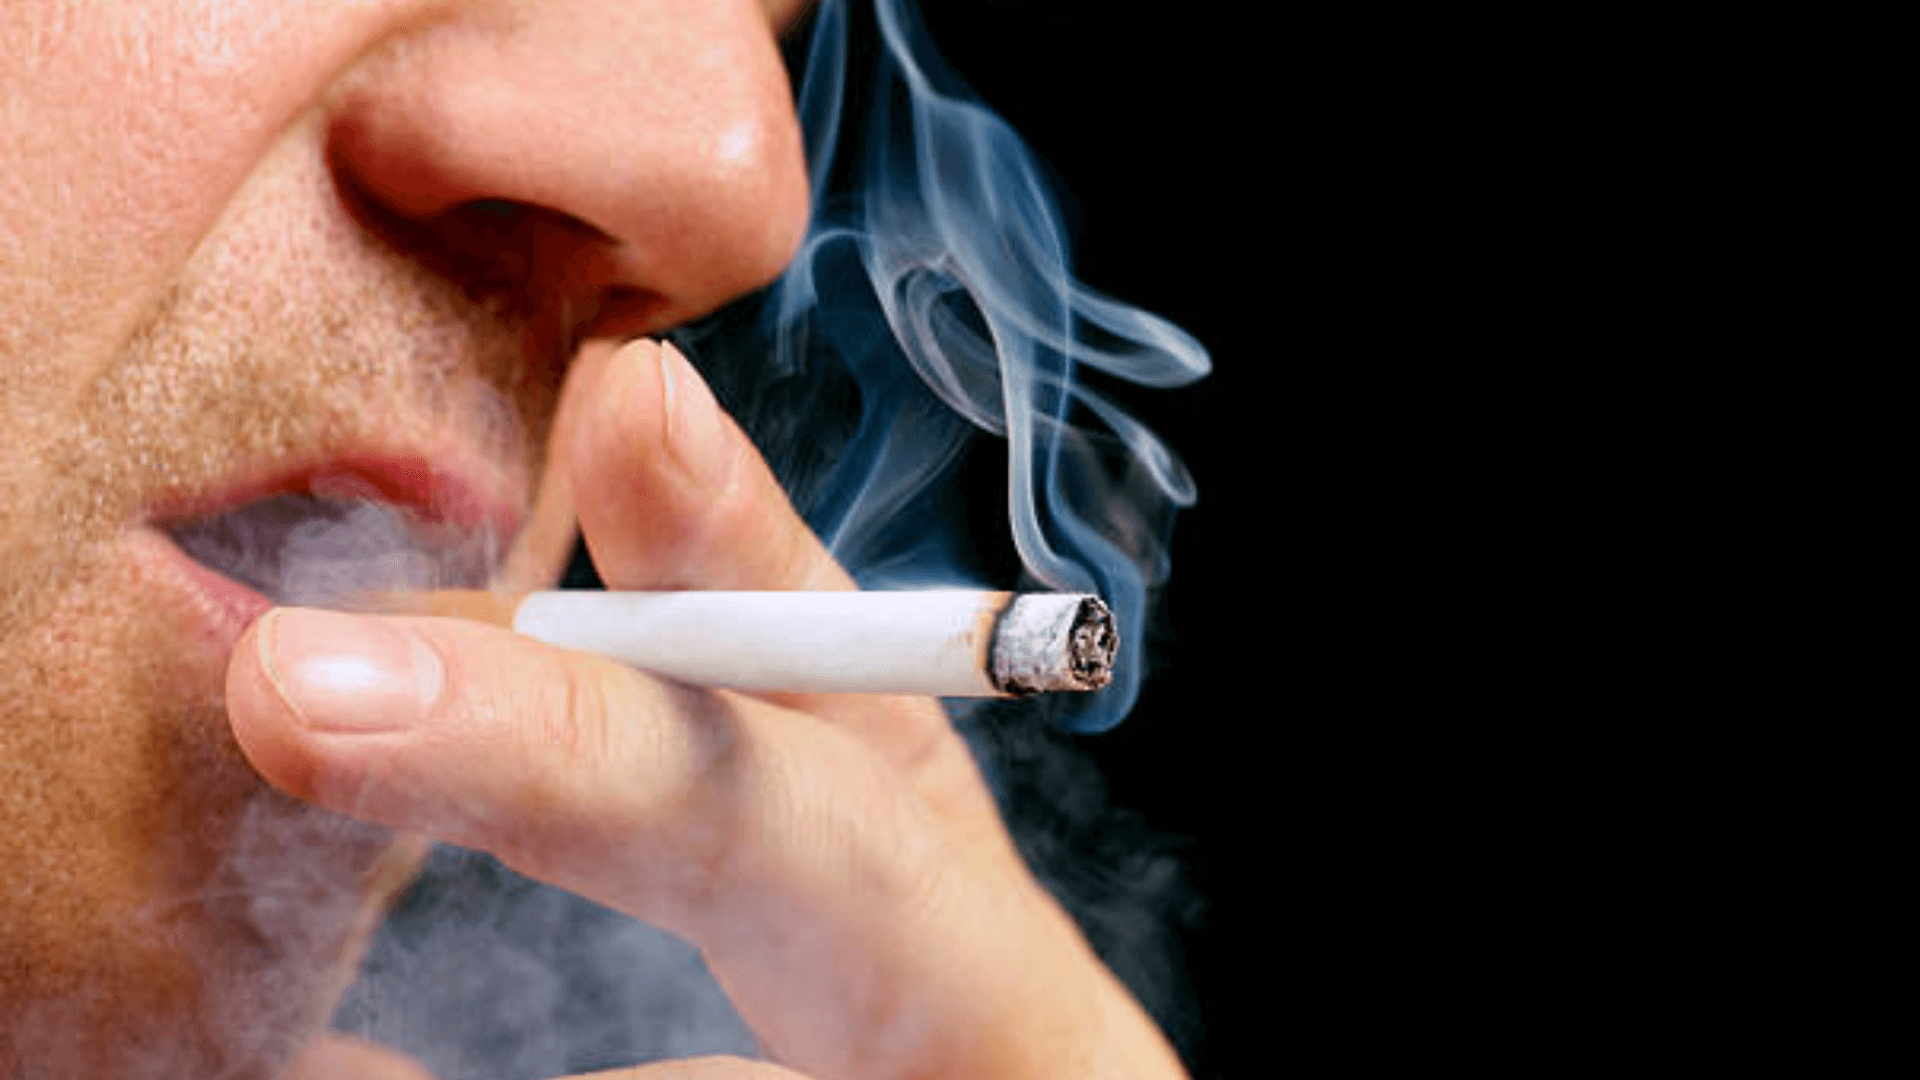 A-Silent-Sleep-Threat-For-Smokers-Was-Discovered-1